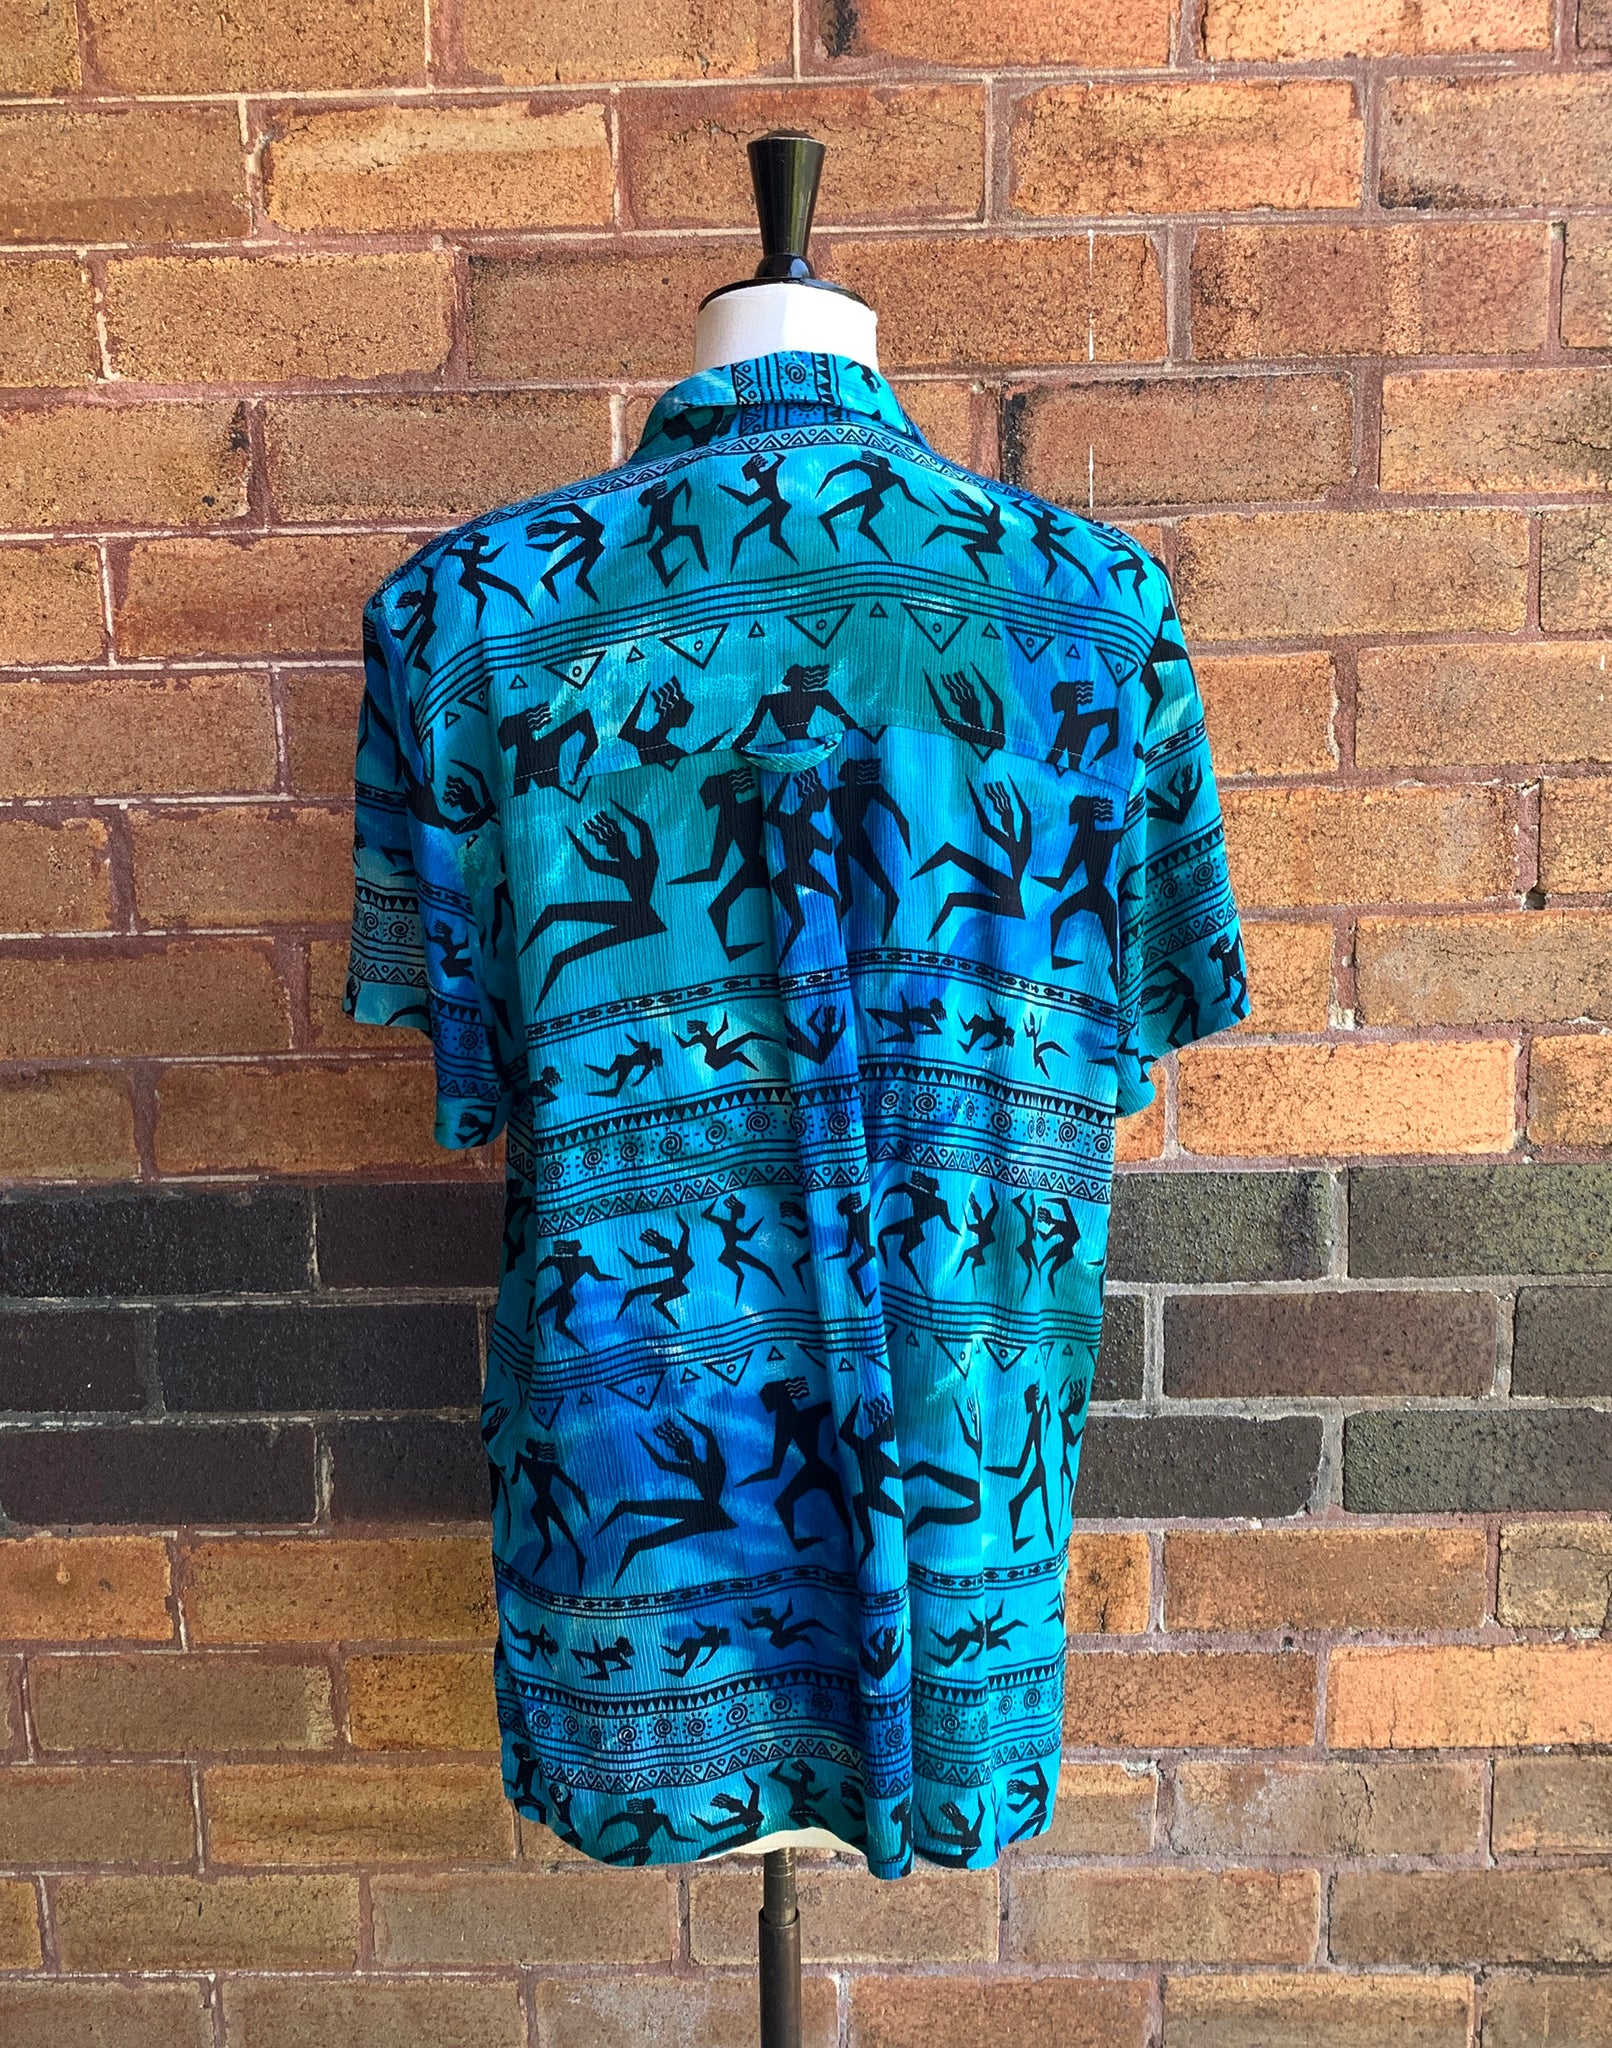 Vintage 80's Turquoise Printed Shirt - Size M/L